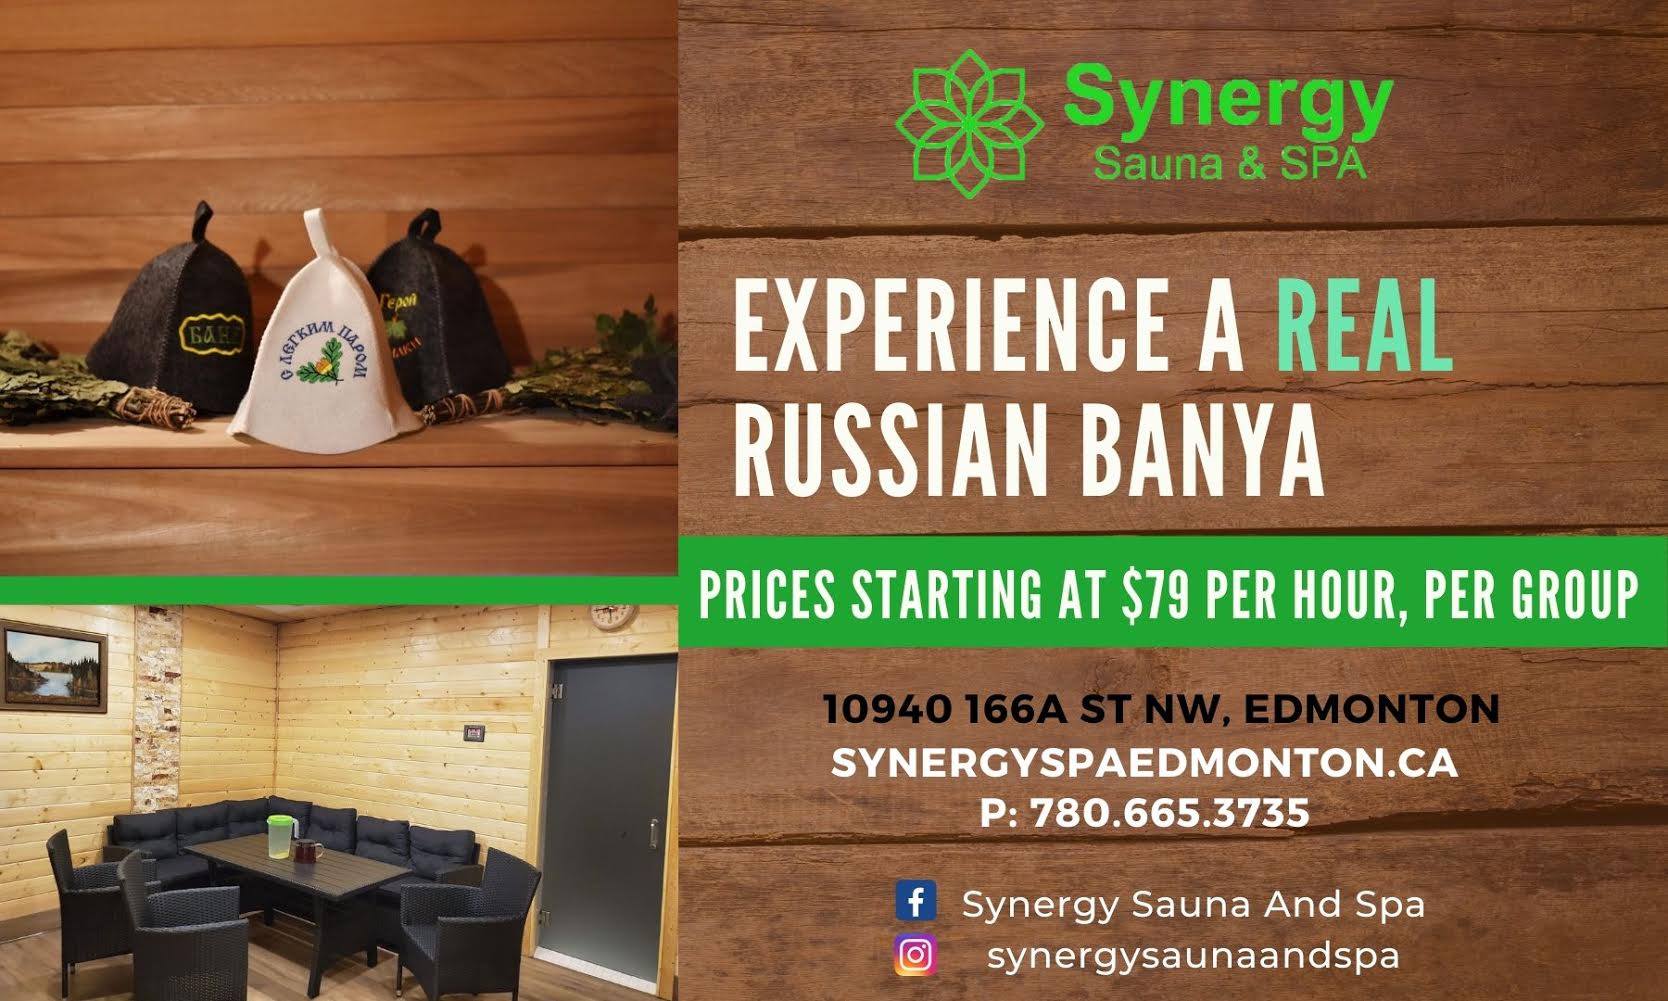 Experience the real Russian banya in Edmonton, Alberta - check rates and regular specials